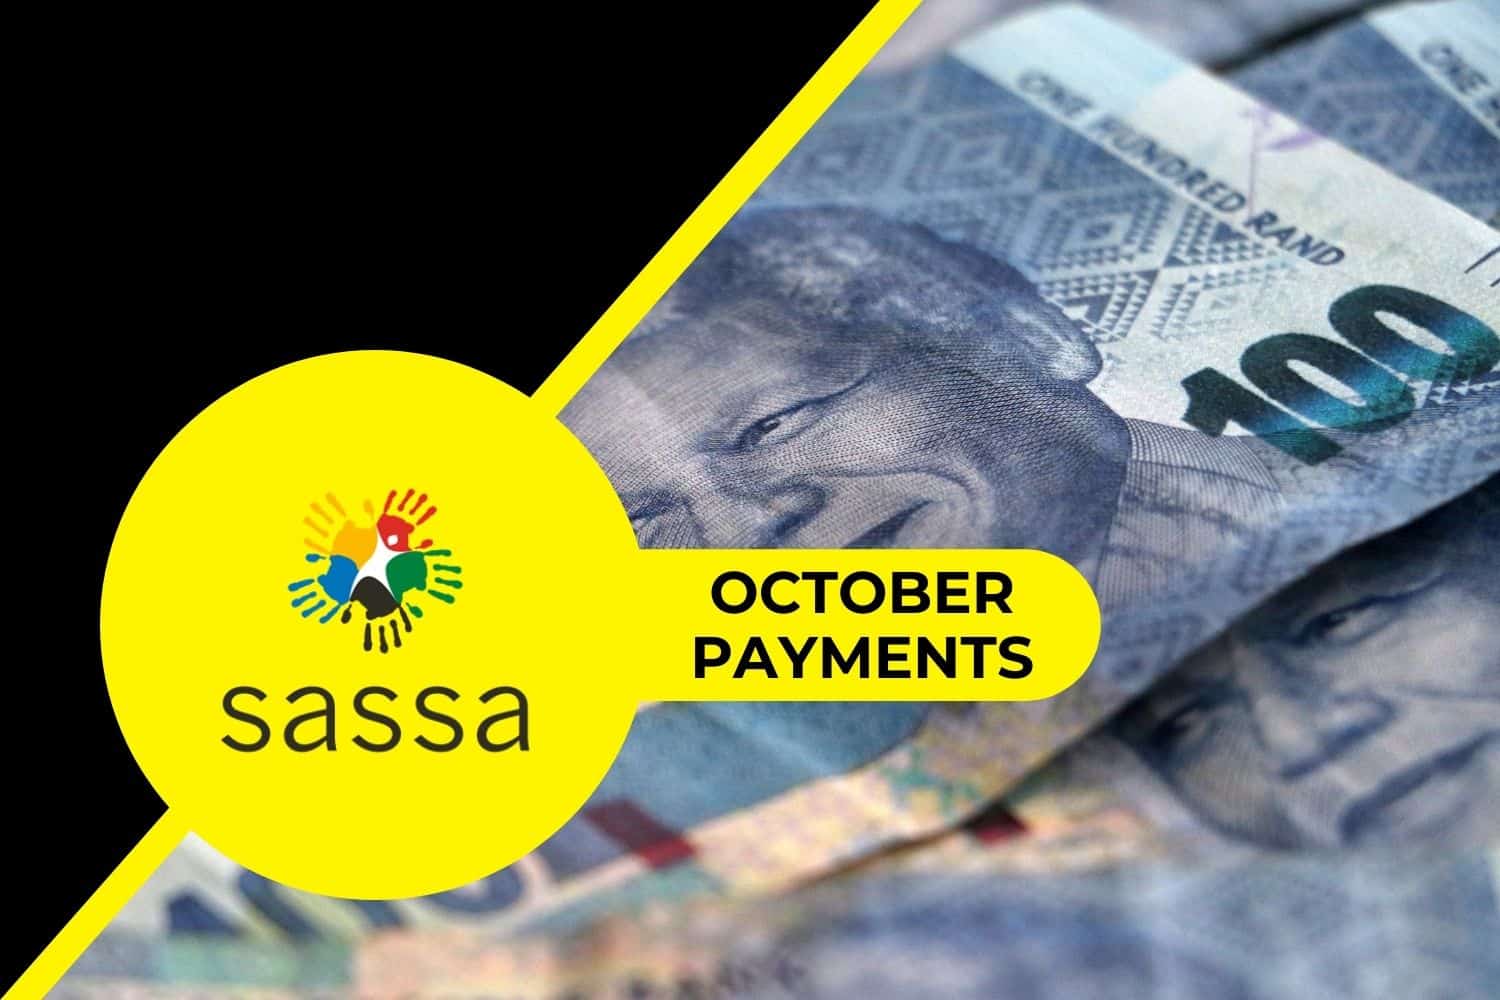 SASSA changed October payment dates one day after posting schedule